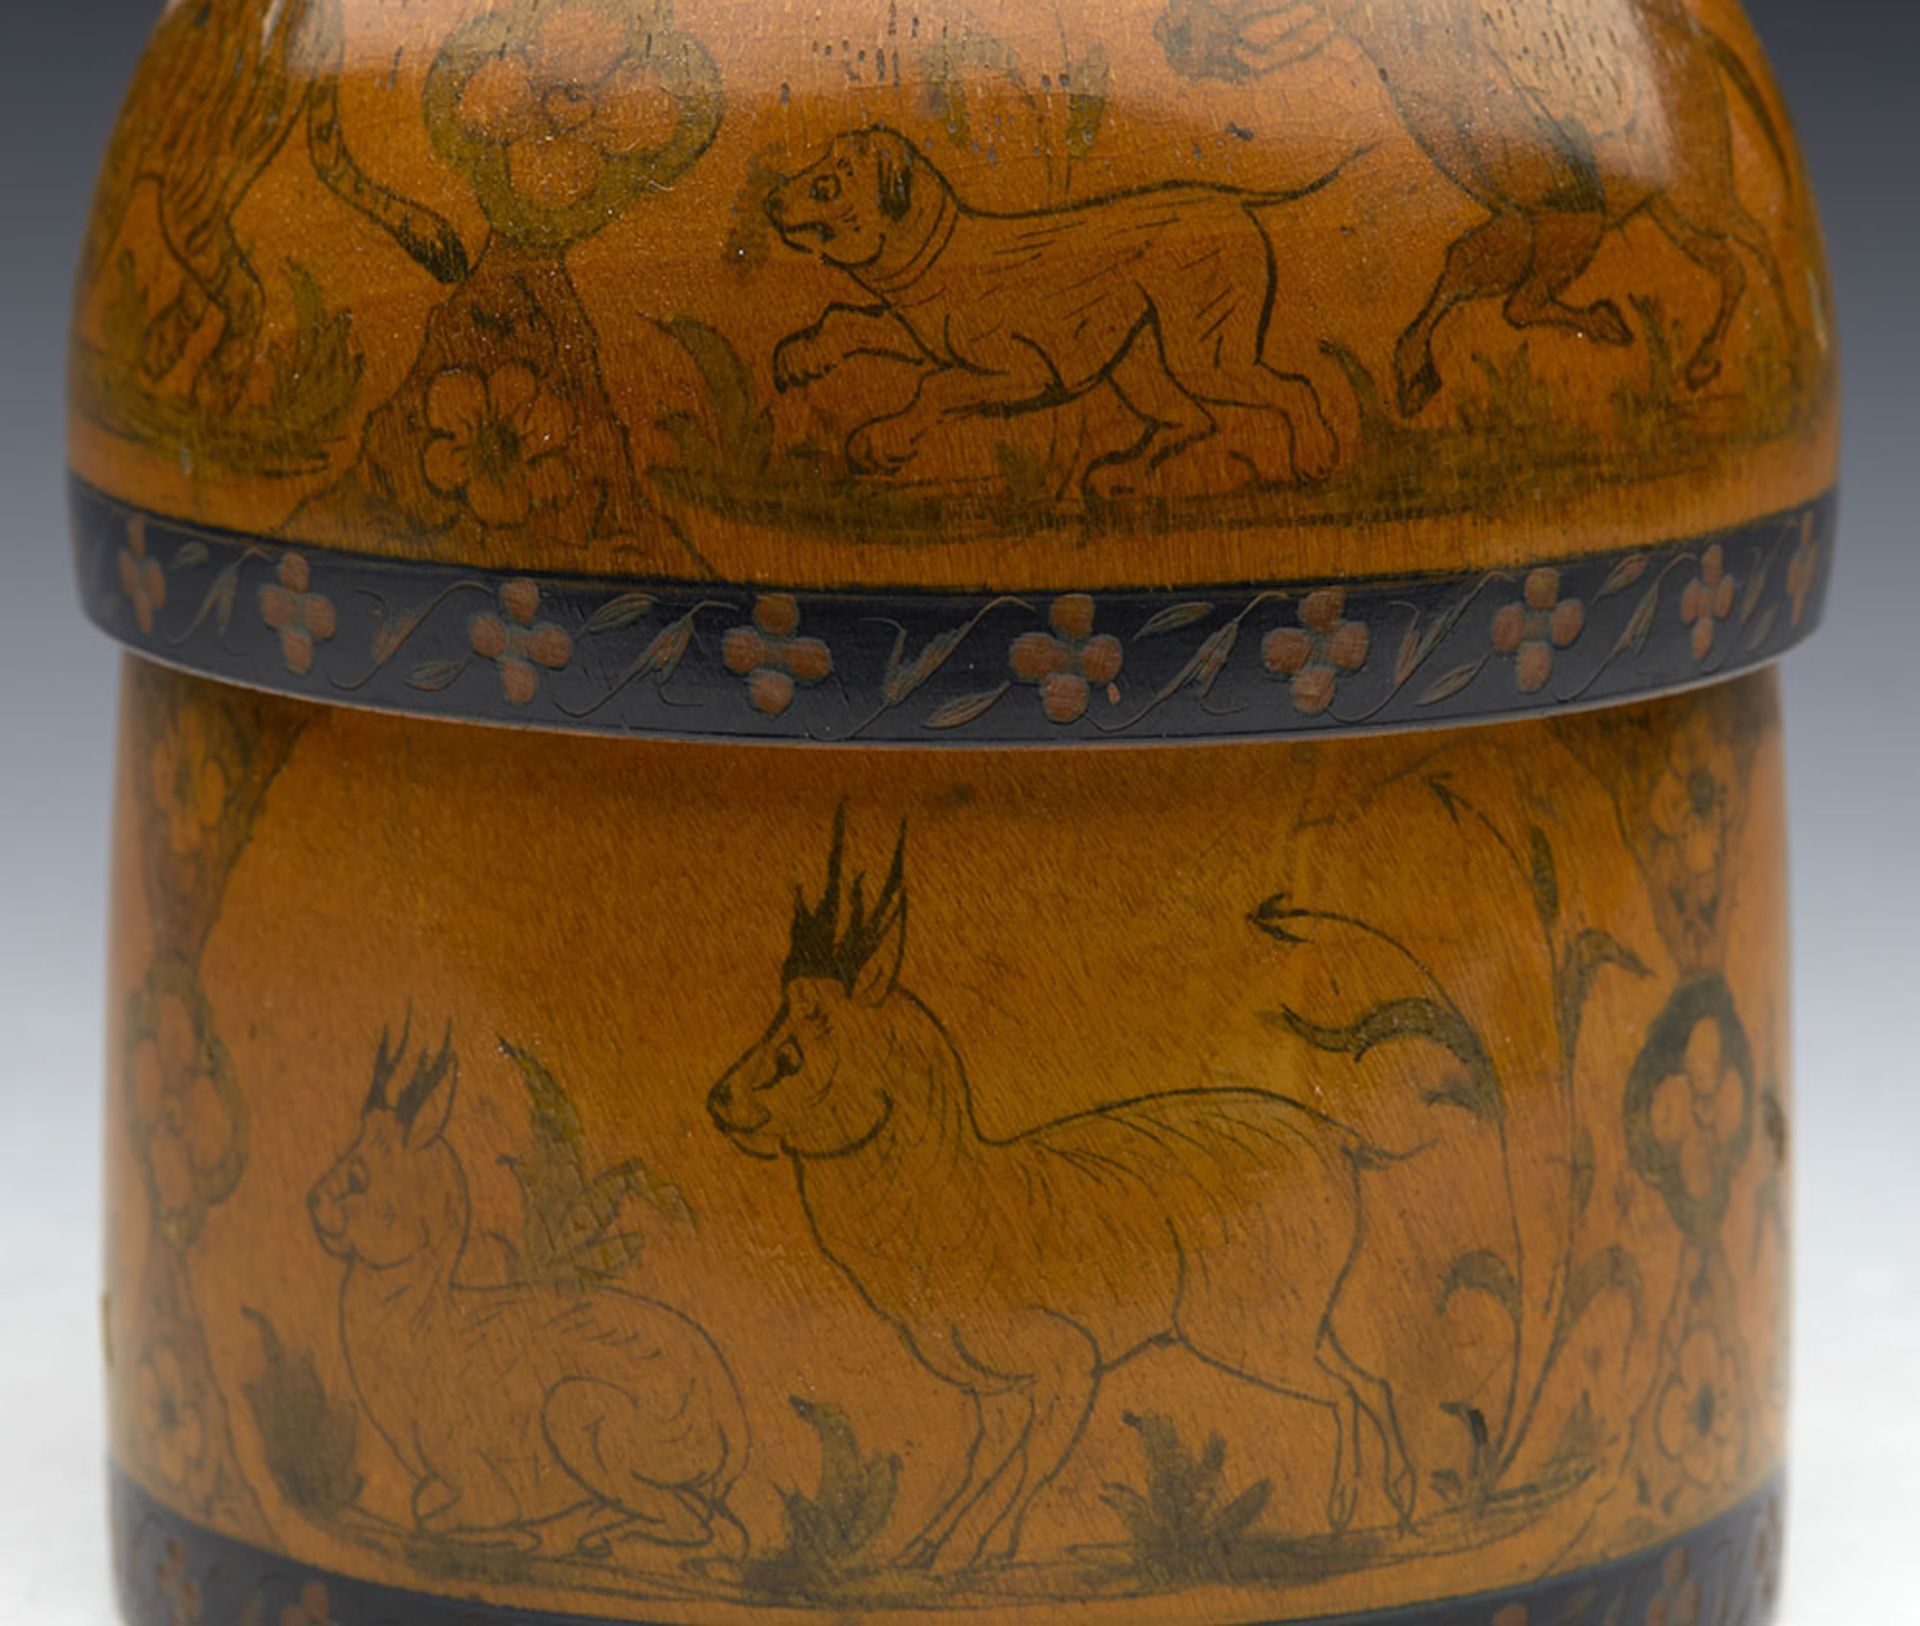 Antique Indian Wooden Lidded Jar Painted With Animals & Figures 19Th C. - Image 3 of 10